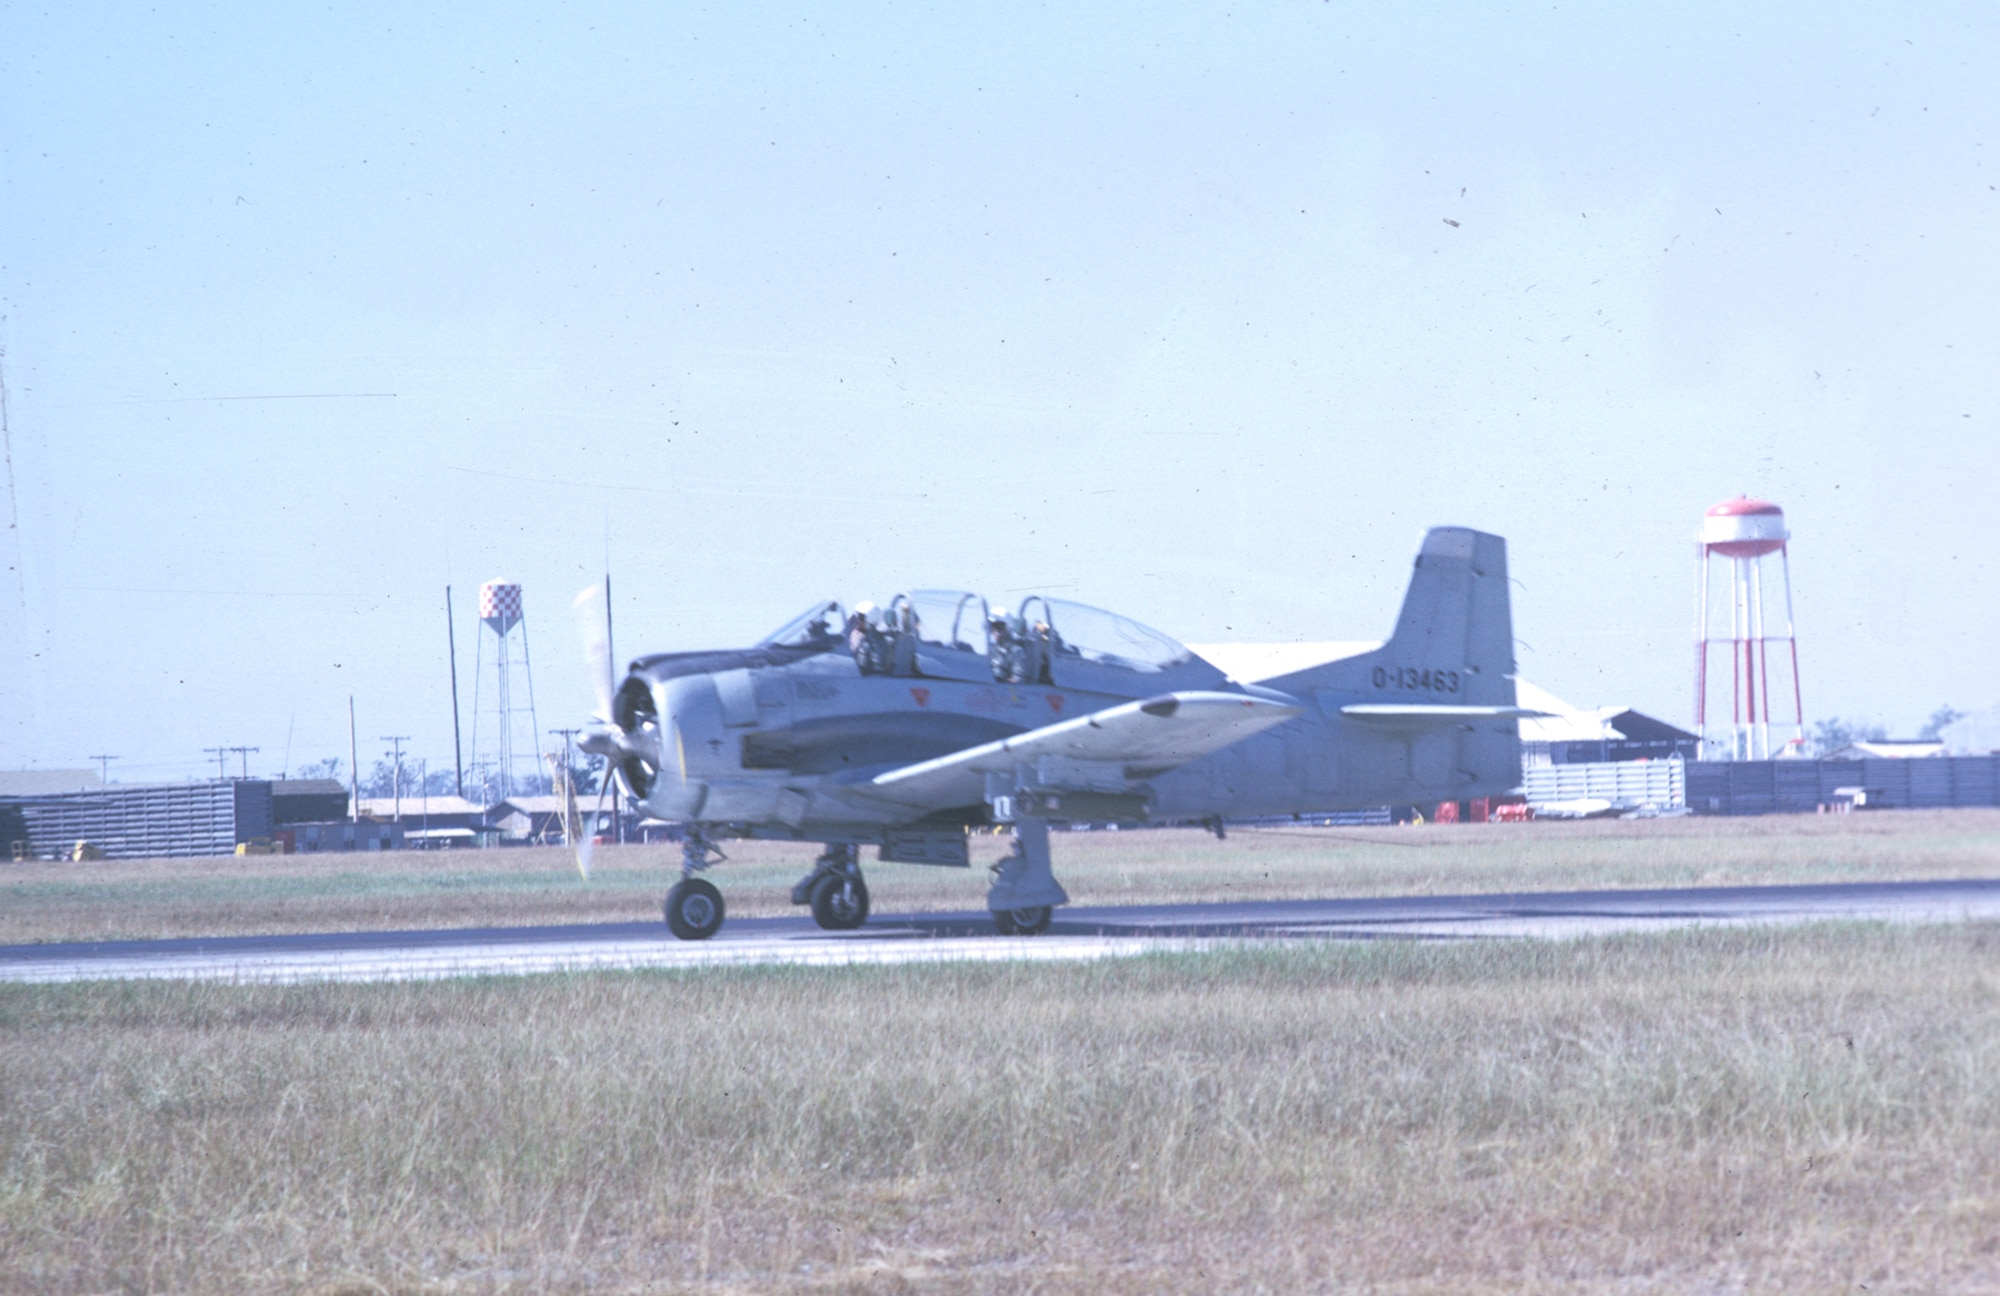 Unmarked T-28 attach aircraft. (U.S. Air Force photo).